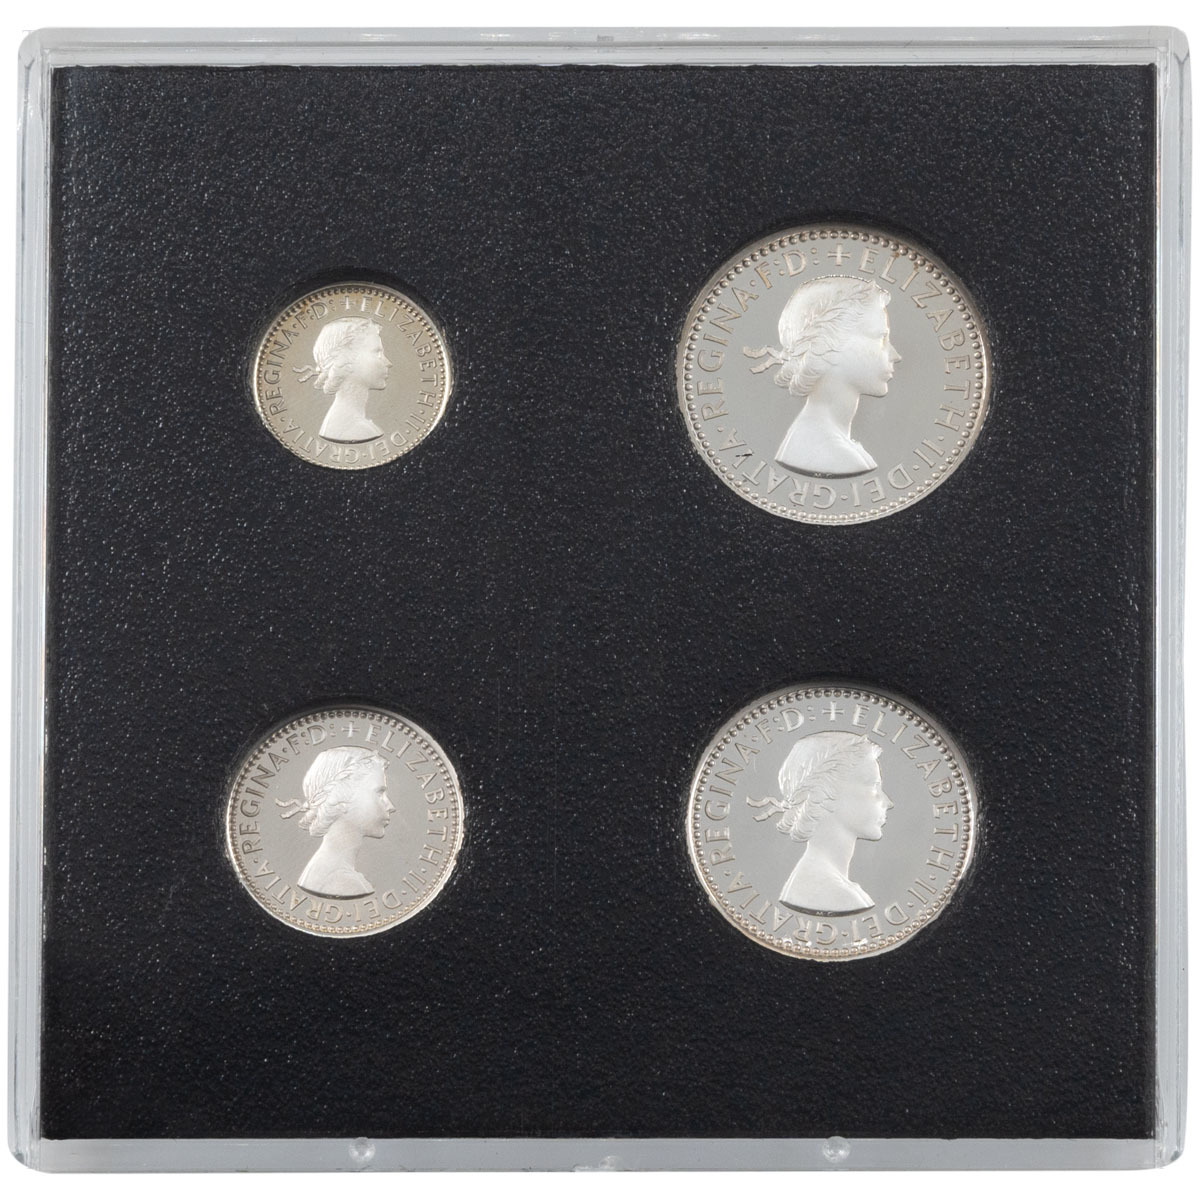 2019 Maundy Money Silver Four Coin Set Obverse